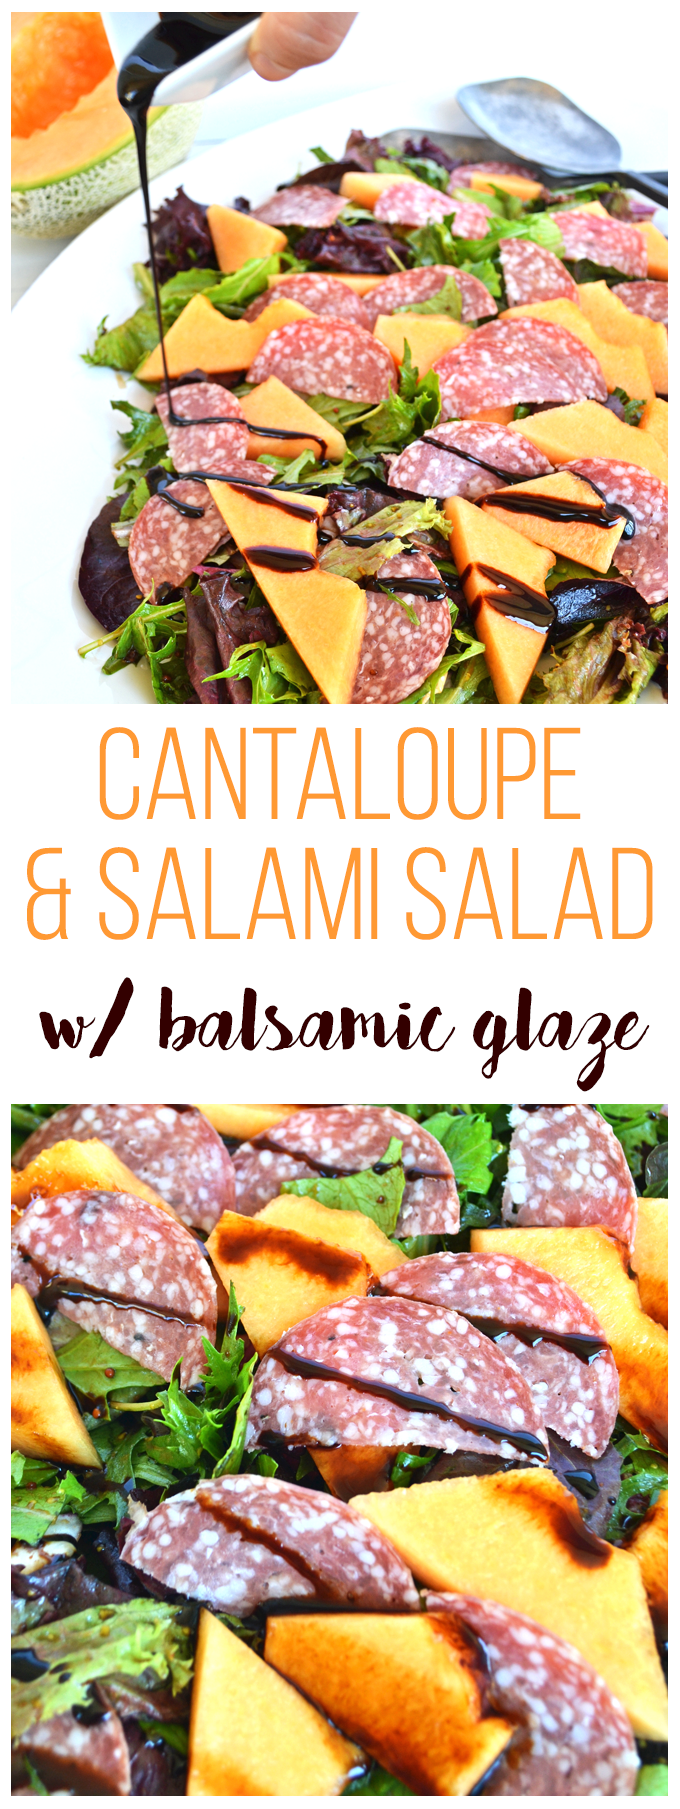 This Cantaloupe & Salami Salad with Balsamic Glaze is refreshing and perfect side dish for spring and summer! 